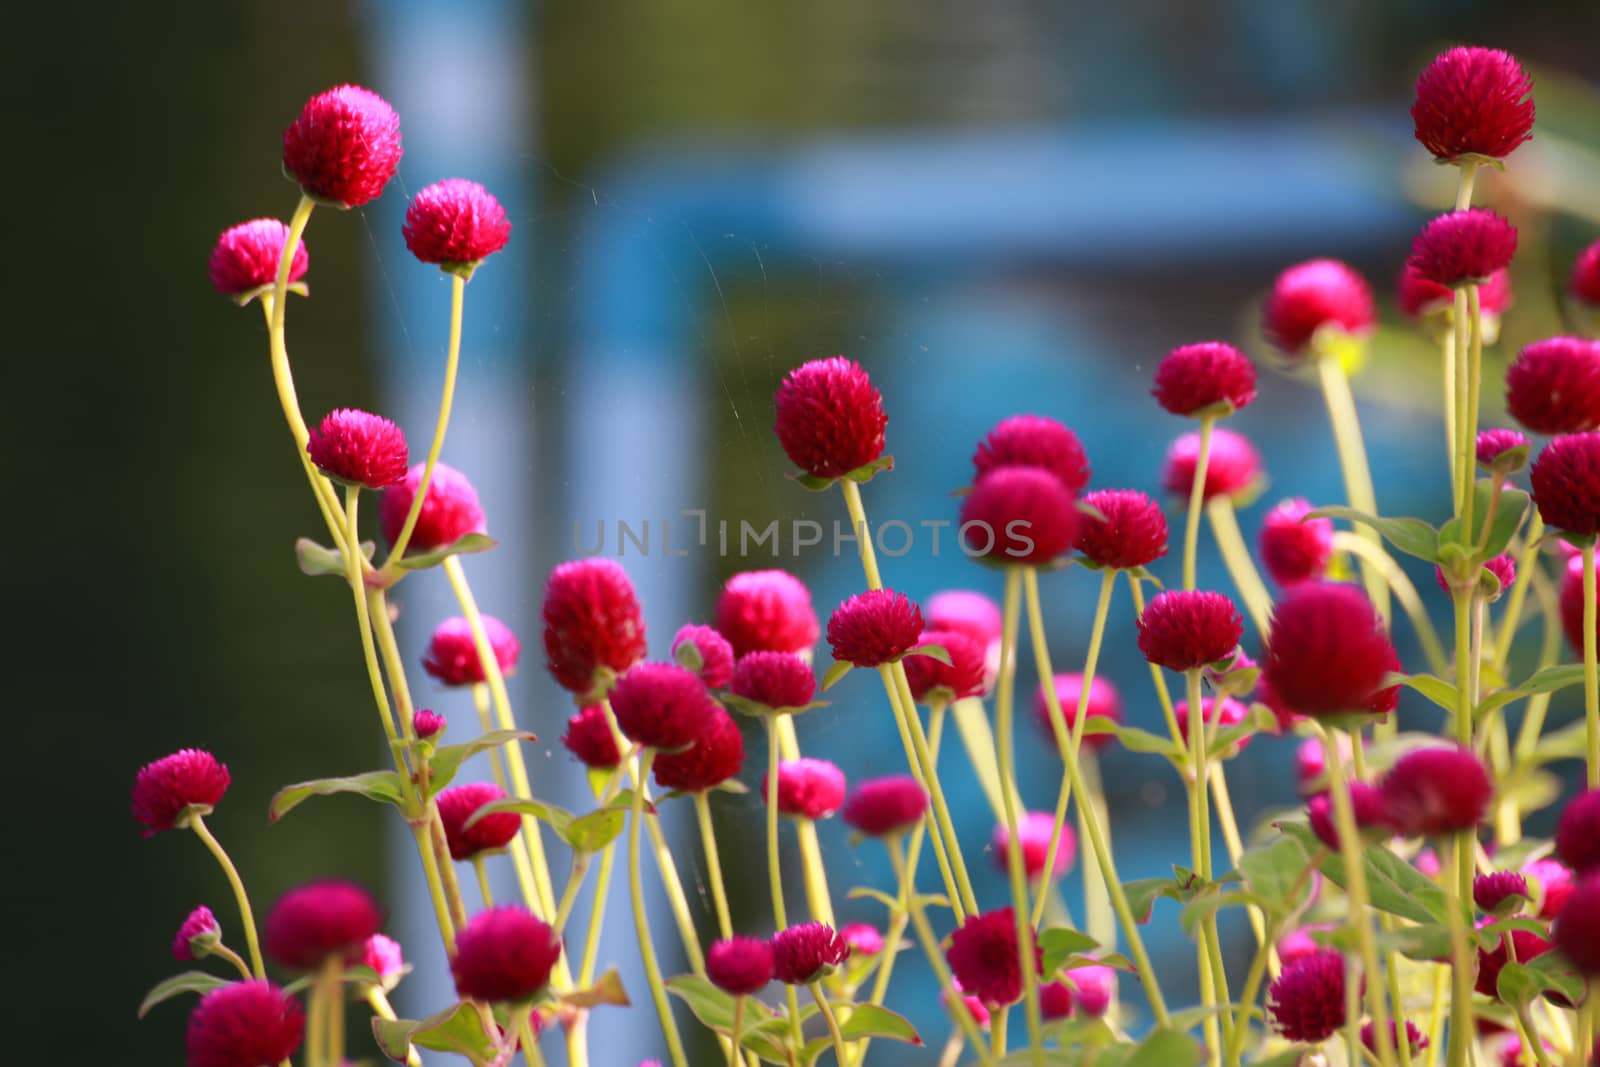 The Globe Amaranth are growing near the footpath.